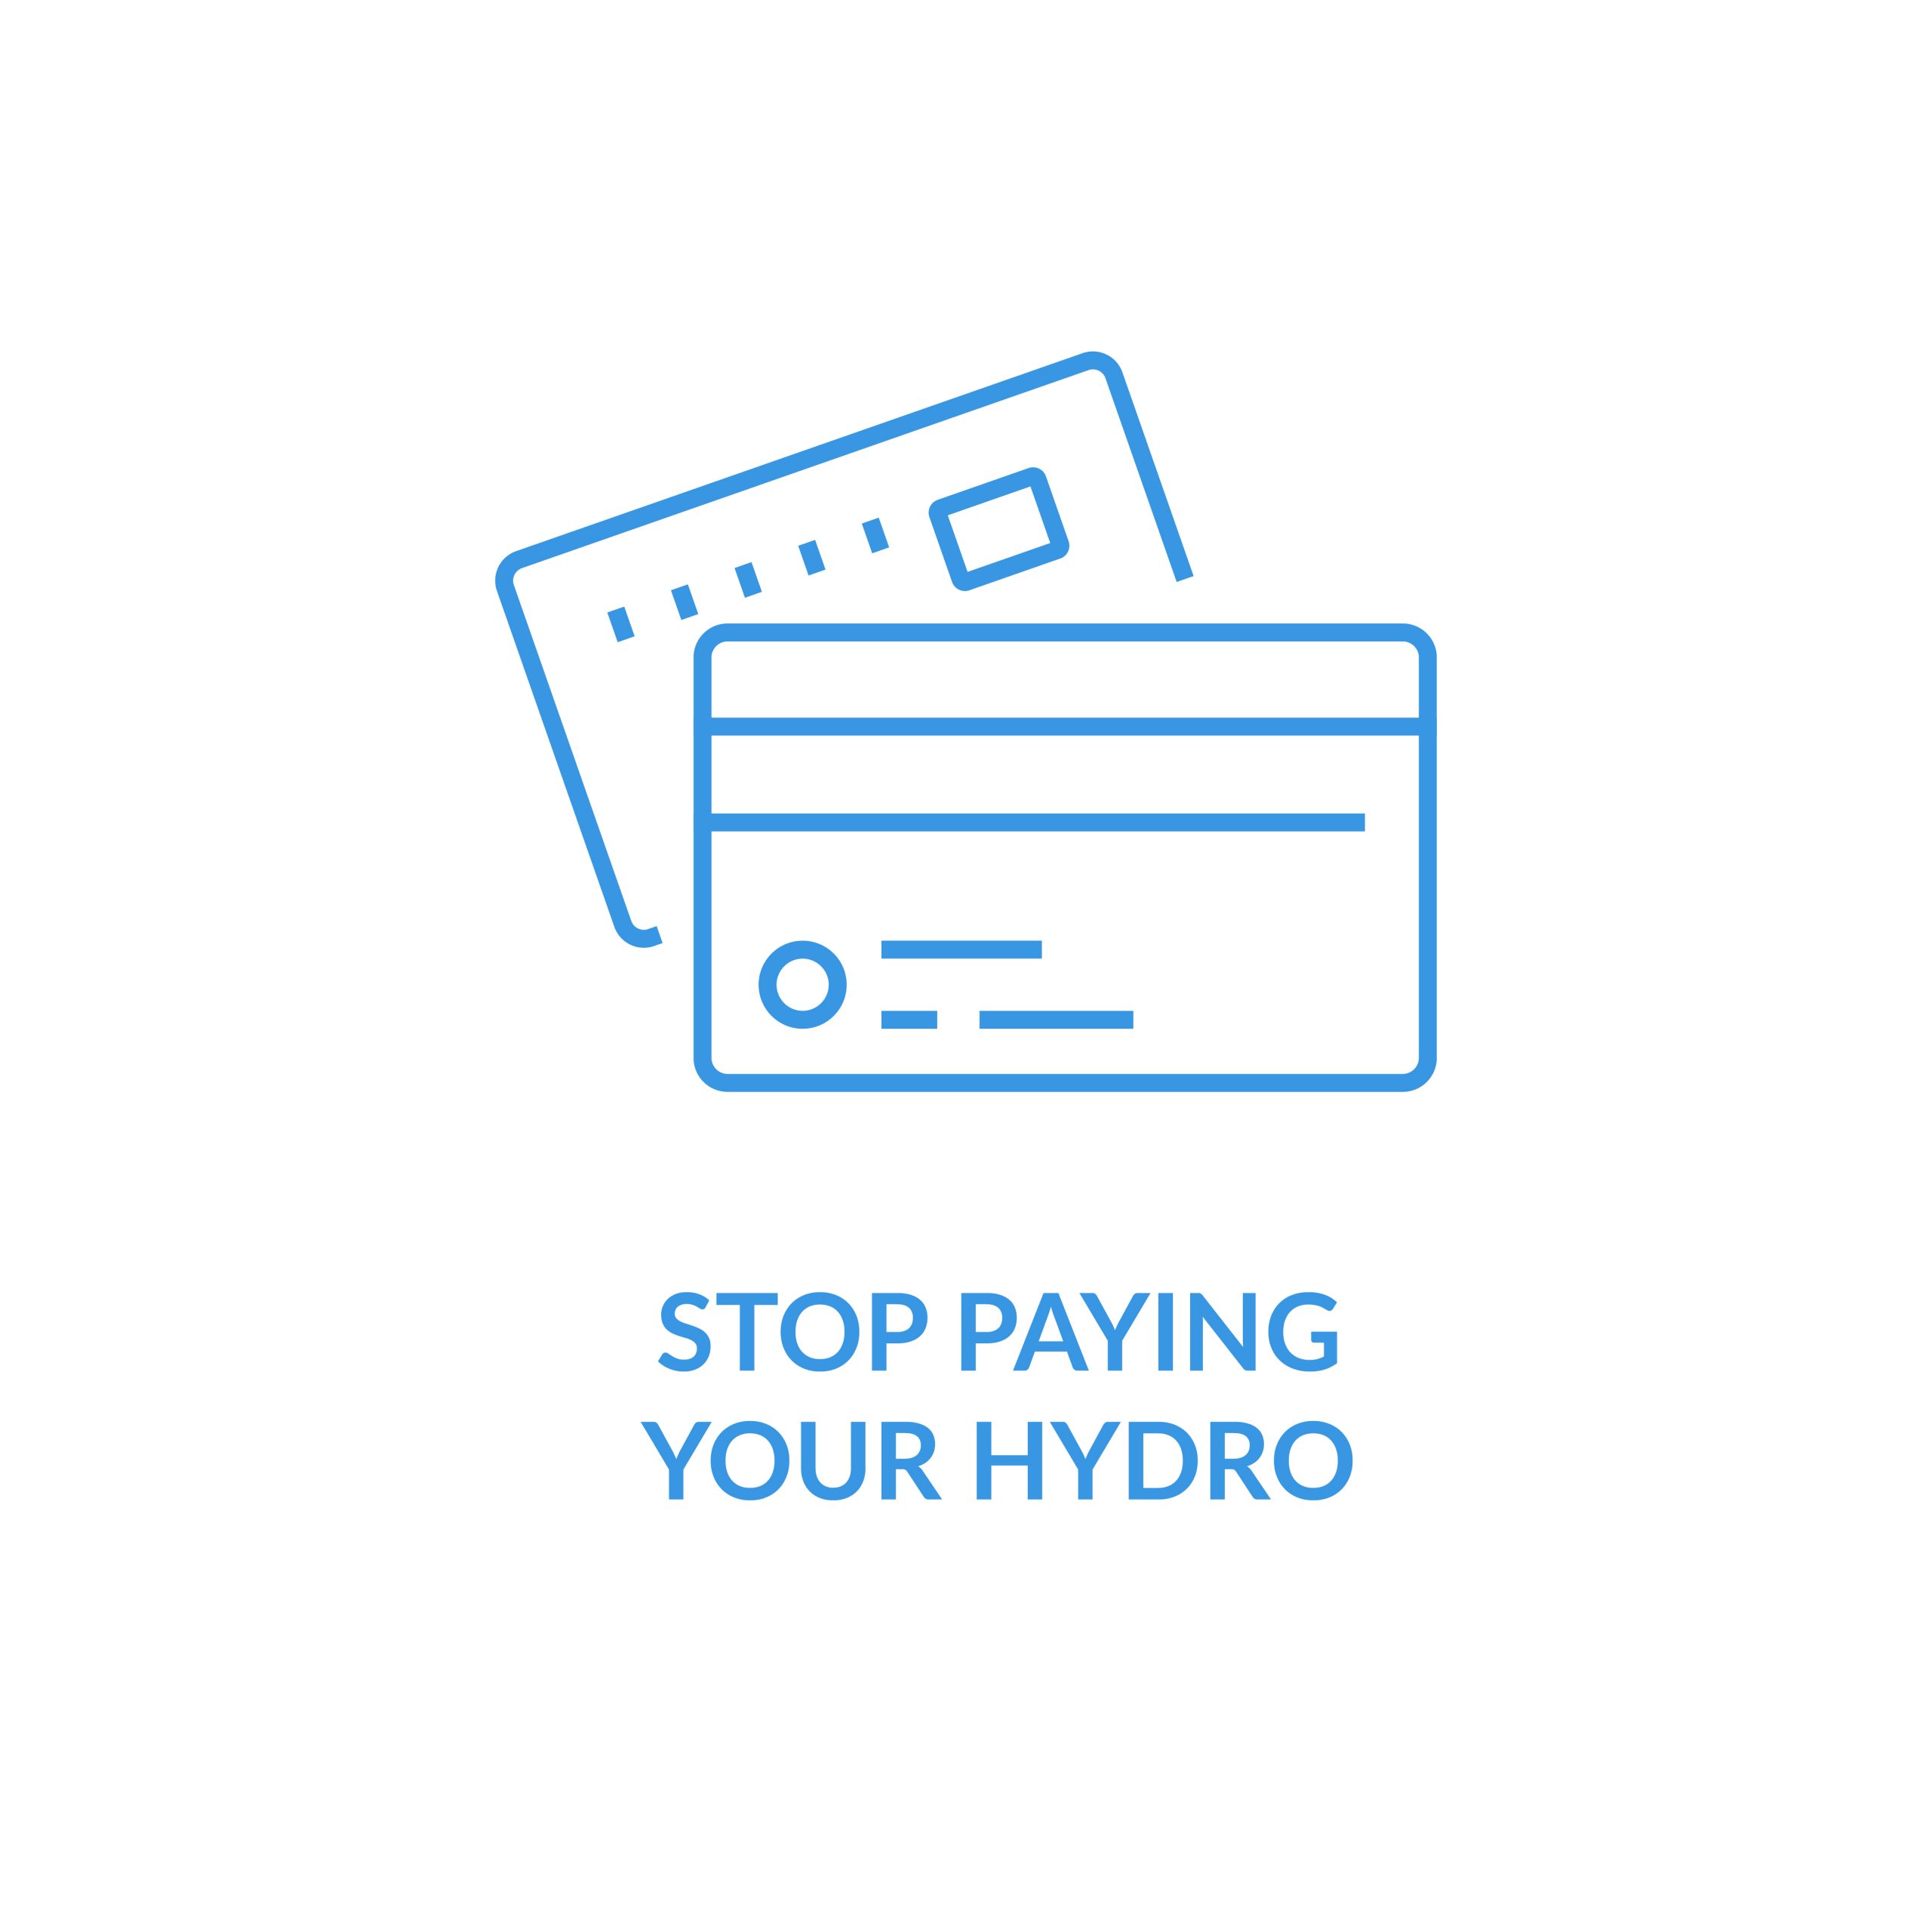 install solar panels and stop paying hydro frees icon